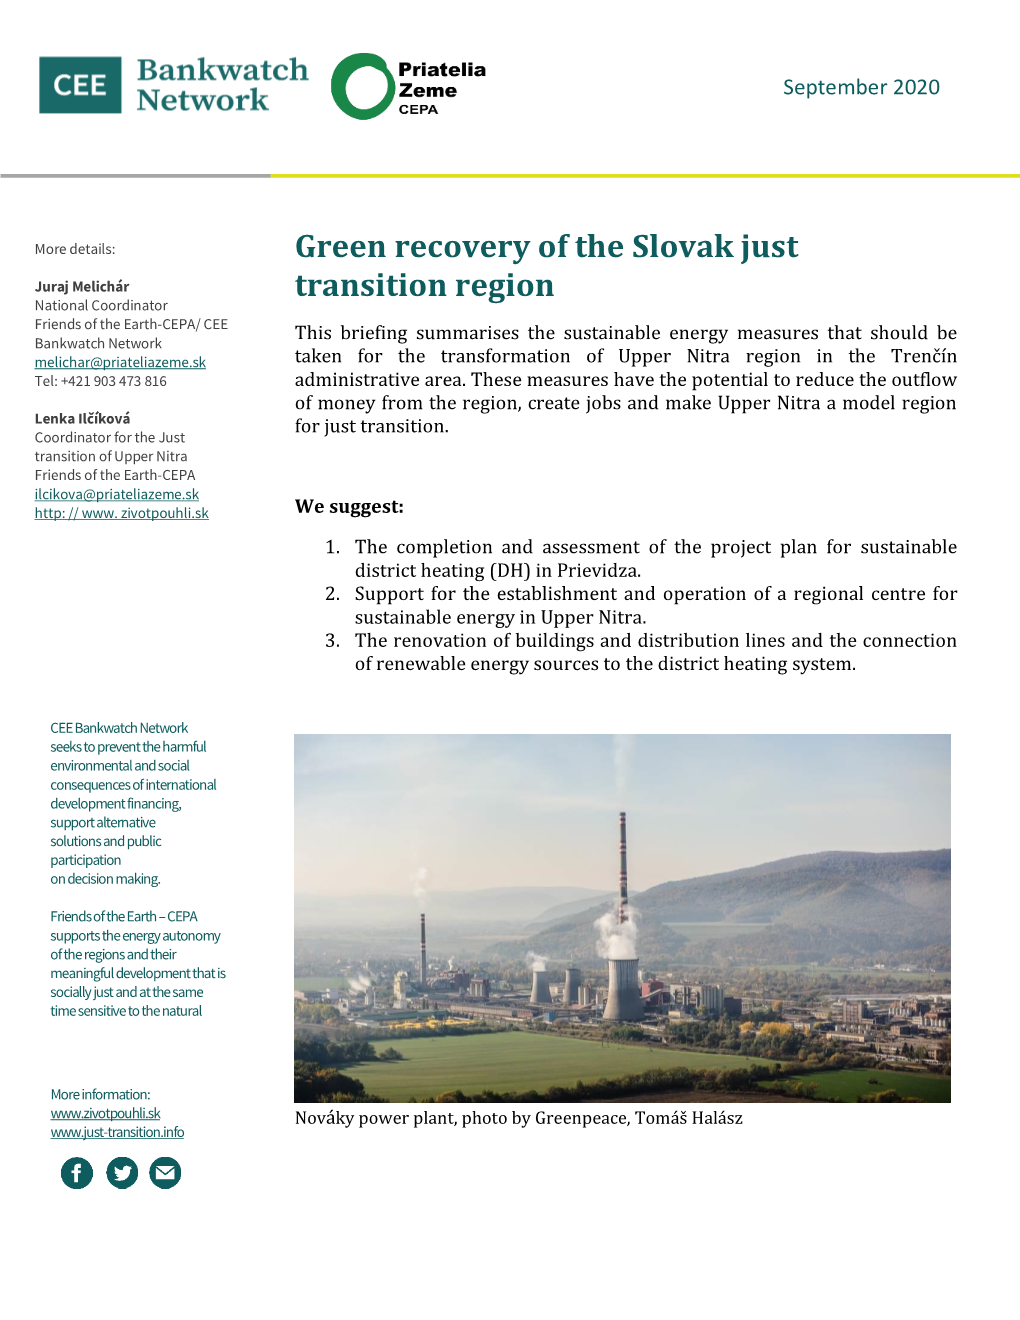 Green Recovery of the Slovak Just Transition Region